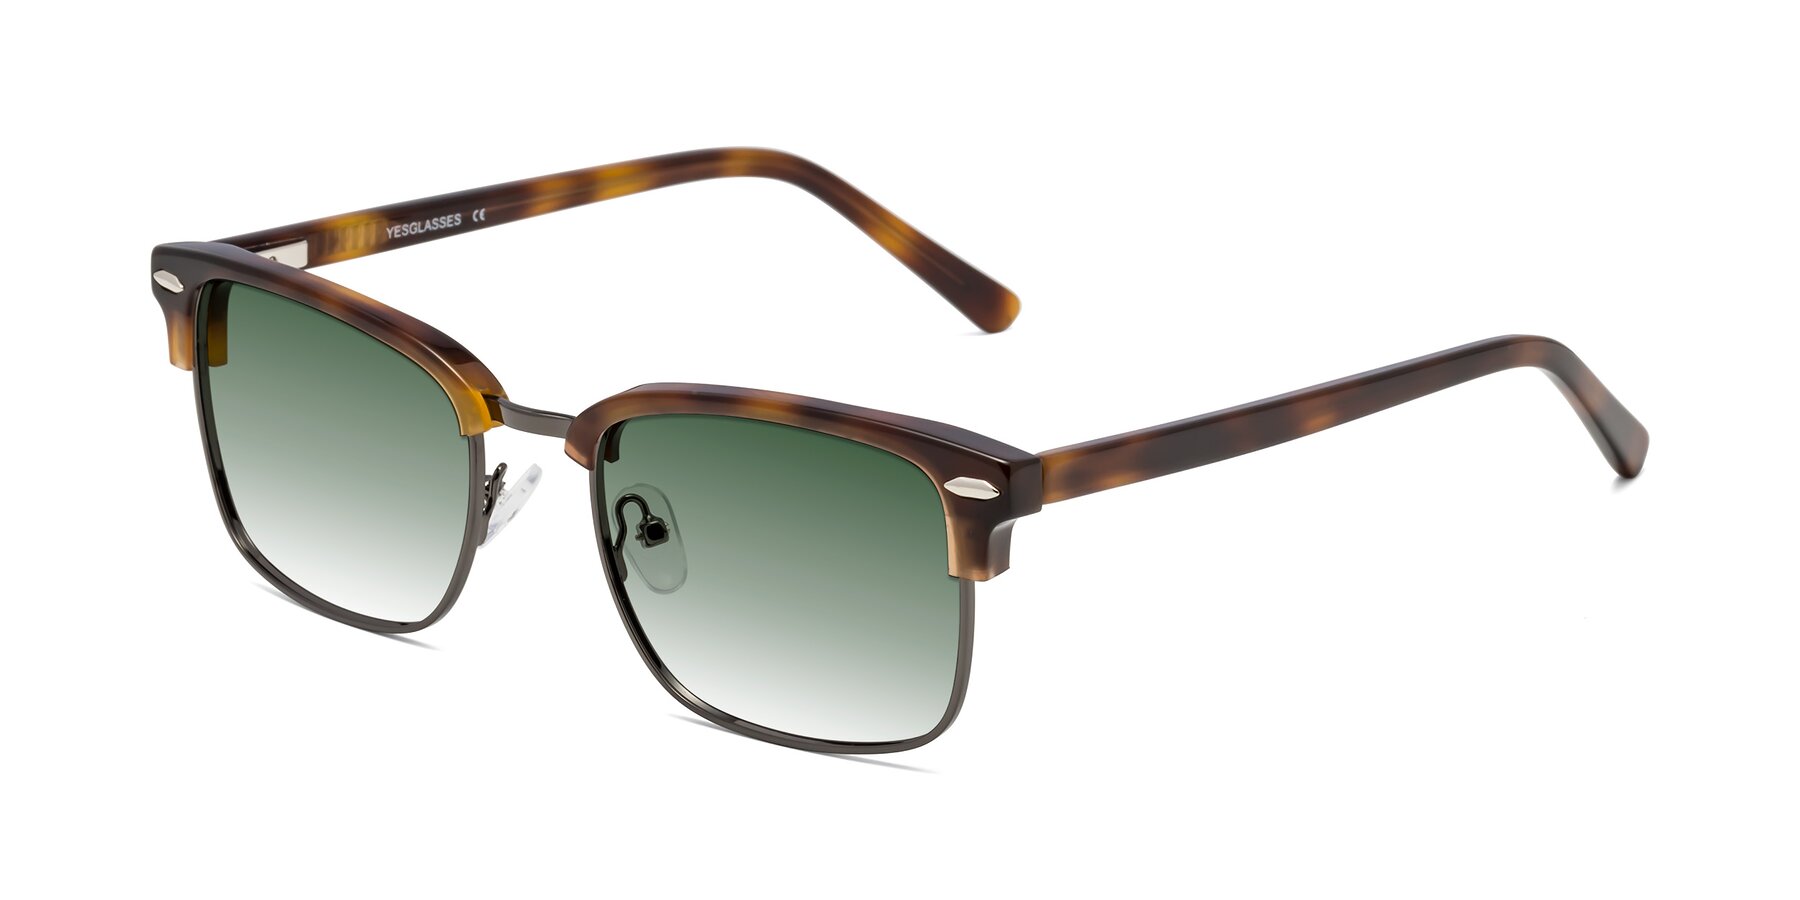 Angle of 17464 in Tortoise/ Gunmetal with Green Gradient Lenses